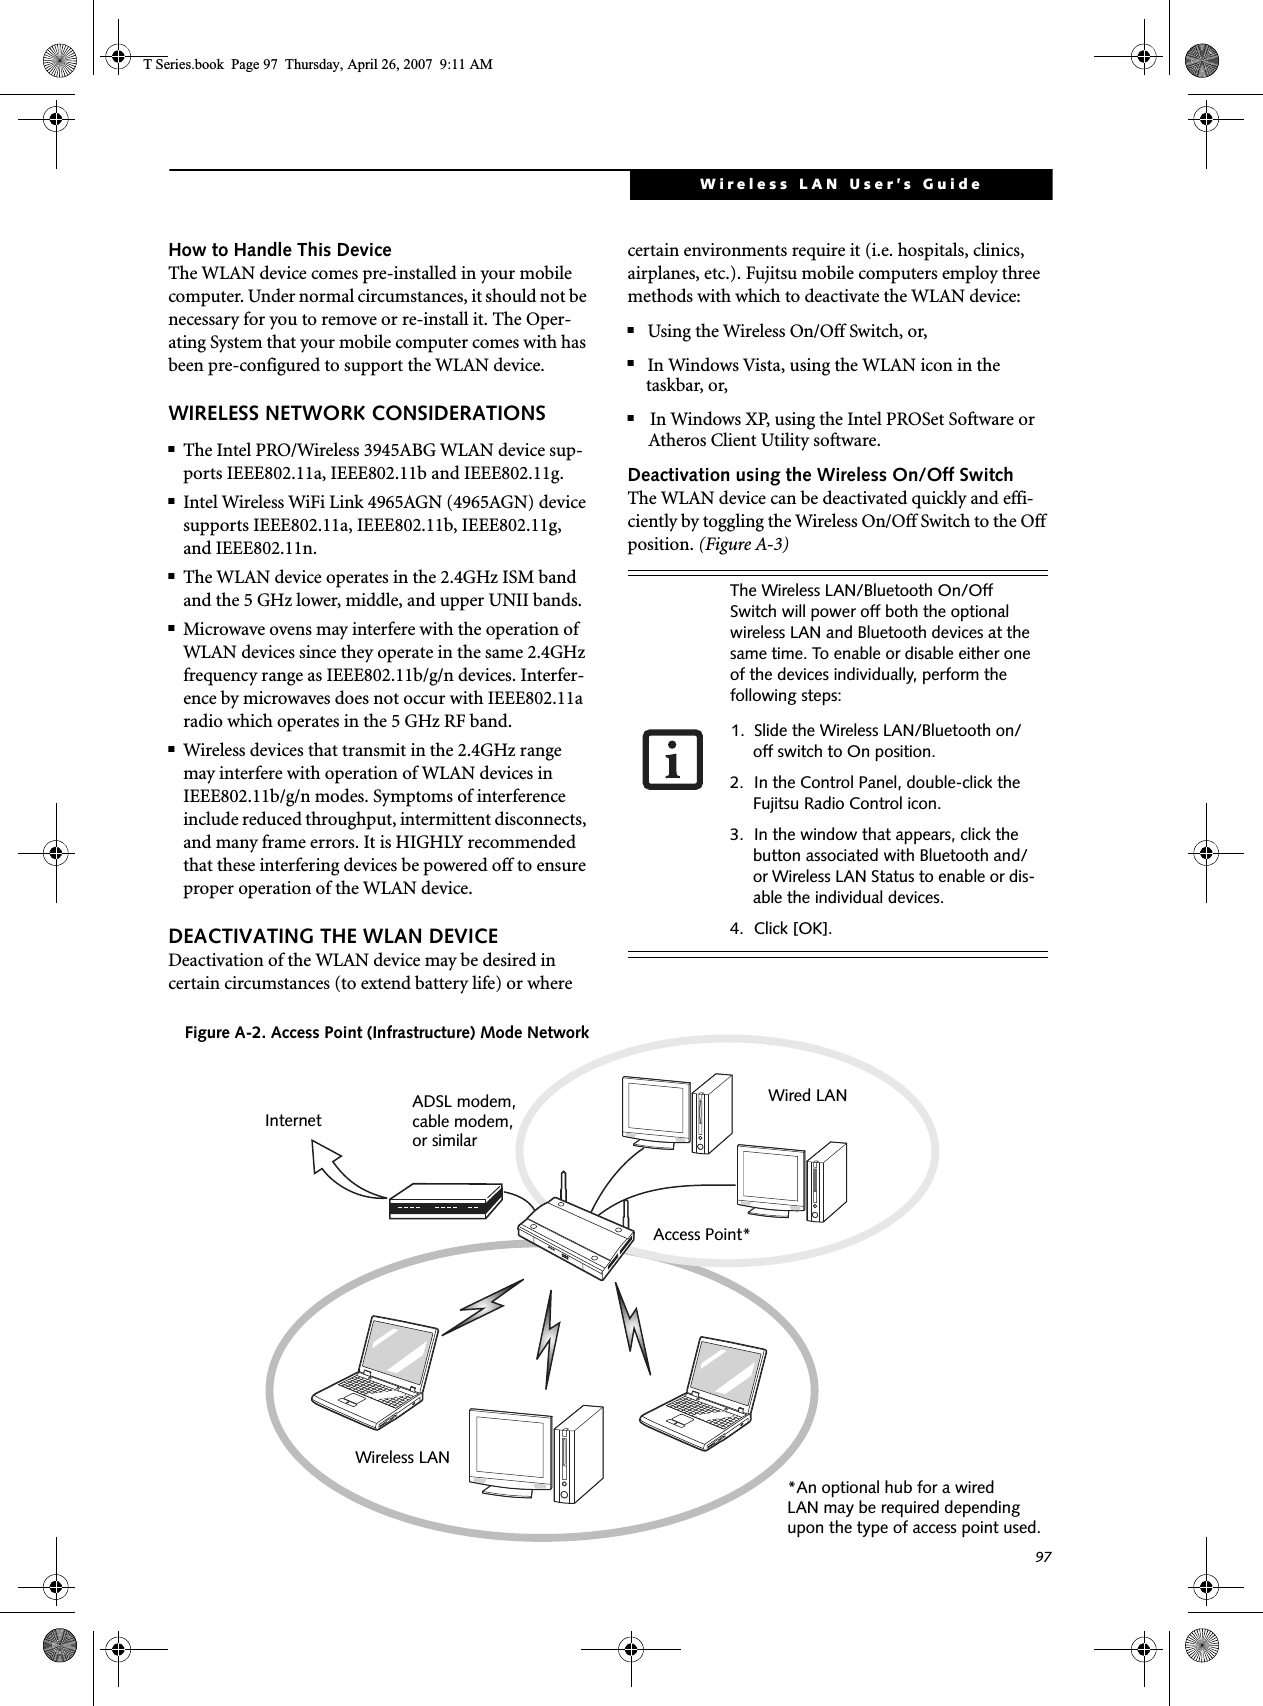 97Wireless LAN User’s Guide How to Handle This DeviceThe WLAN device comes pre-installed in your mobile computer. Under normal circumstances, it should not be necessary for you to remove or re-install it. The Oper-ating System that your mobile computer comes with has been pre-configured to support the WLAN device. WIRELESS NETWORK CONSIDERATIONS■The Intel PRO/Wireless 3945ABG WLAN device sup-ports IEEE802.11a, IEEE802.11b and IEEE802.11g.■Intel Wireless WiFi Link 4965AGN (4965AGN) device supports IEEE802.11a, IEEE802.11b, IEEE802.11g, and IEEE802.11n.■The WLAN device operates in the 2.4GHz ISM band and the 5 GHz lower, middle, and upper UNII bands.■Microwave ovens may interfere with the operation of WLAN devices since they operate in the same 2.4GHz frequency range as IEEE802.11b/g/n devices. Interfer-ence by microwaves does not occur with IEEE802.11a radio which operates in the 5 GHz RF band.■Wireless devices that transmit in the 2.4GHz range may interfere with operation of WLAN devices in IEEE802.11b/g/n modes. Symptoms of interference include reduced throughput, intermittent disconnects, and many frame errors. It is HIGHLY recommended that these interfering devices be powered off to ensure proper operation of the WLAN device.DEACTIVATING THE WLAN DEVICEDeactivation of the WLAN device may be desired in certain circumstances (to extend battery life) or where certain environments require it (i.e. hospitals, clinics, airplanes, etc.). Fujitsu mobile computers employ three methods with which to deactivate the WLAN device:■Using the Wireless On/Off Switch, or,■In Windows Vista, using the WLAN icon in the taskbar, or,■In Windows XP, using the Intel PROSet Software or Atheros Client Utility software.Deactivation using the Wireless On/Off SwitchThe WLAN device can be deactivated quickly and effi-ciently by toggling the Wireless On/Off Switch to the Off position. (Figure A-3)The Wireless LAN/Bluetooth On/Off Switch will power off both the optional wireless LAN and Bluetooth devices at the same time. To enable or disable either one of the devices individually, perform the following steps:1. Slide the Wireless LAN/Bluetooth on/off switch to On position.2. In the Control Panel, double-click the Fujitsu Radio Control icon.3. In the window that appears, click the button associated with Bluetooth and/or Wireless LAN Status to enable or dis-able the individual devices.4. Click [OK].Figure A-2. Access Point (Infrastructure) Mode NetworkADSL modem,cable modem,or similarInternetWired LANAccess Point*Wireless LAN*An optional hub for a wiredLAN may be required dependingupon the type of access point used.T Series.book  Page 97  Thursday, April 26, 2007  9:11 AM